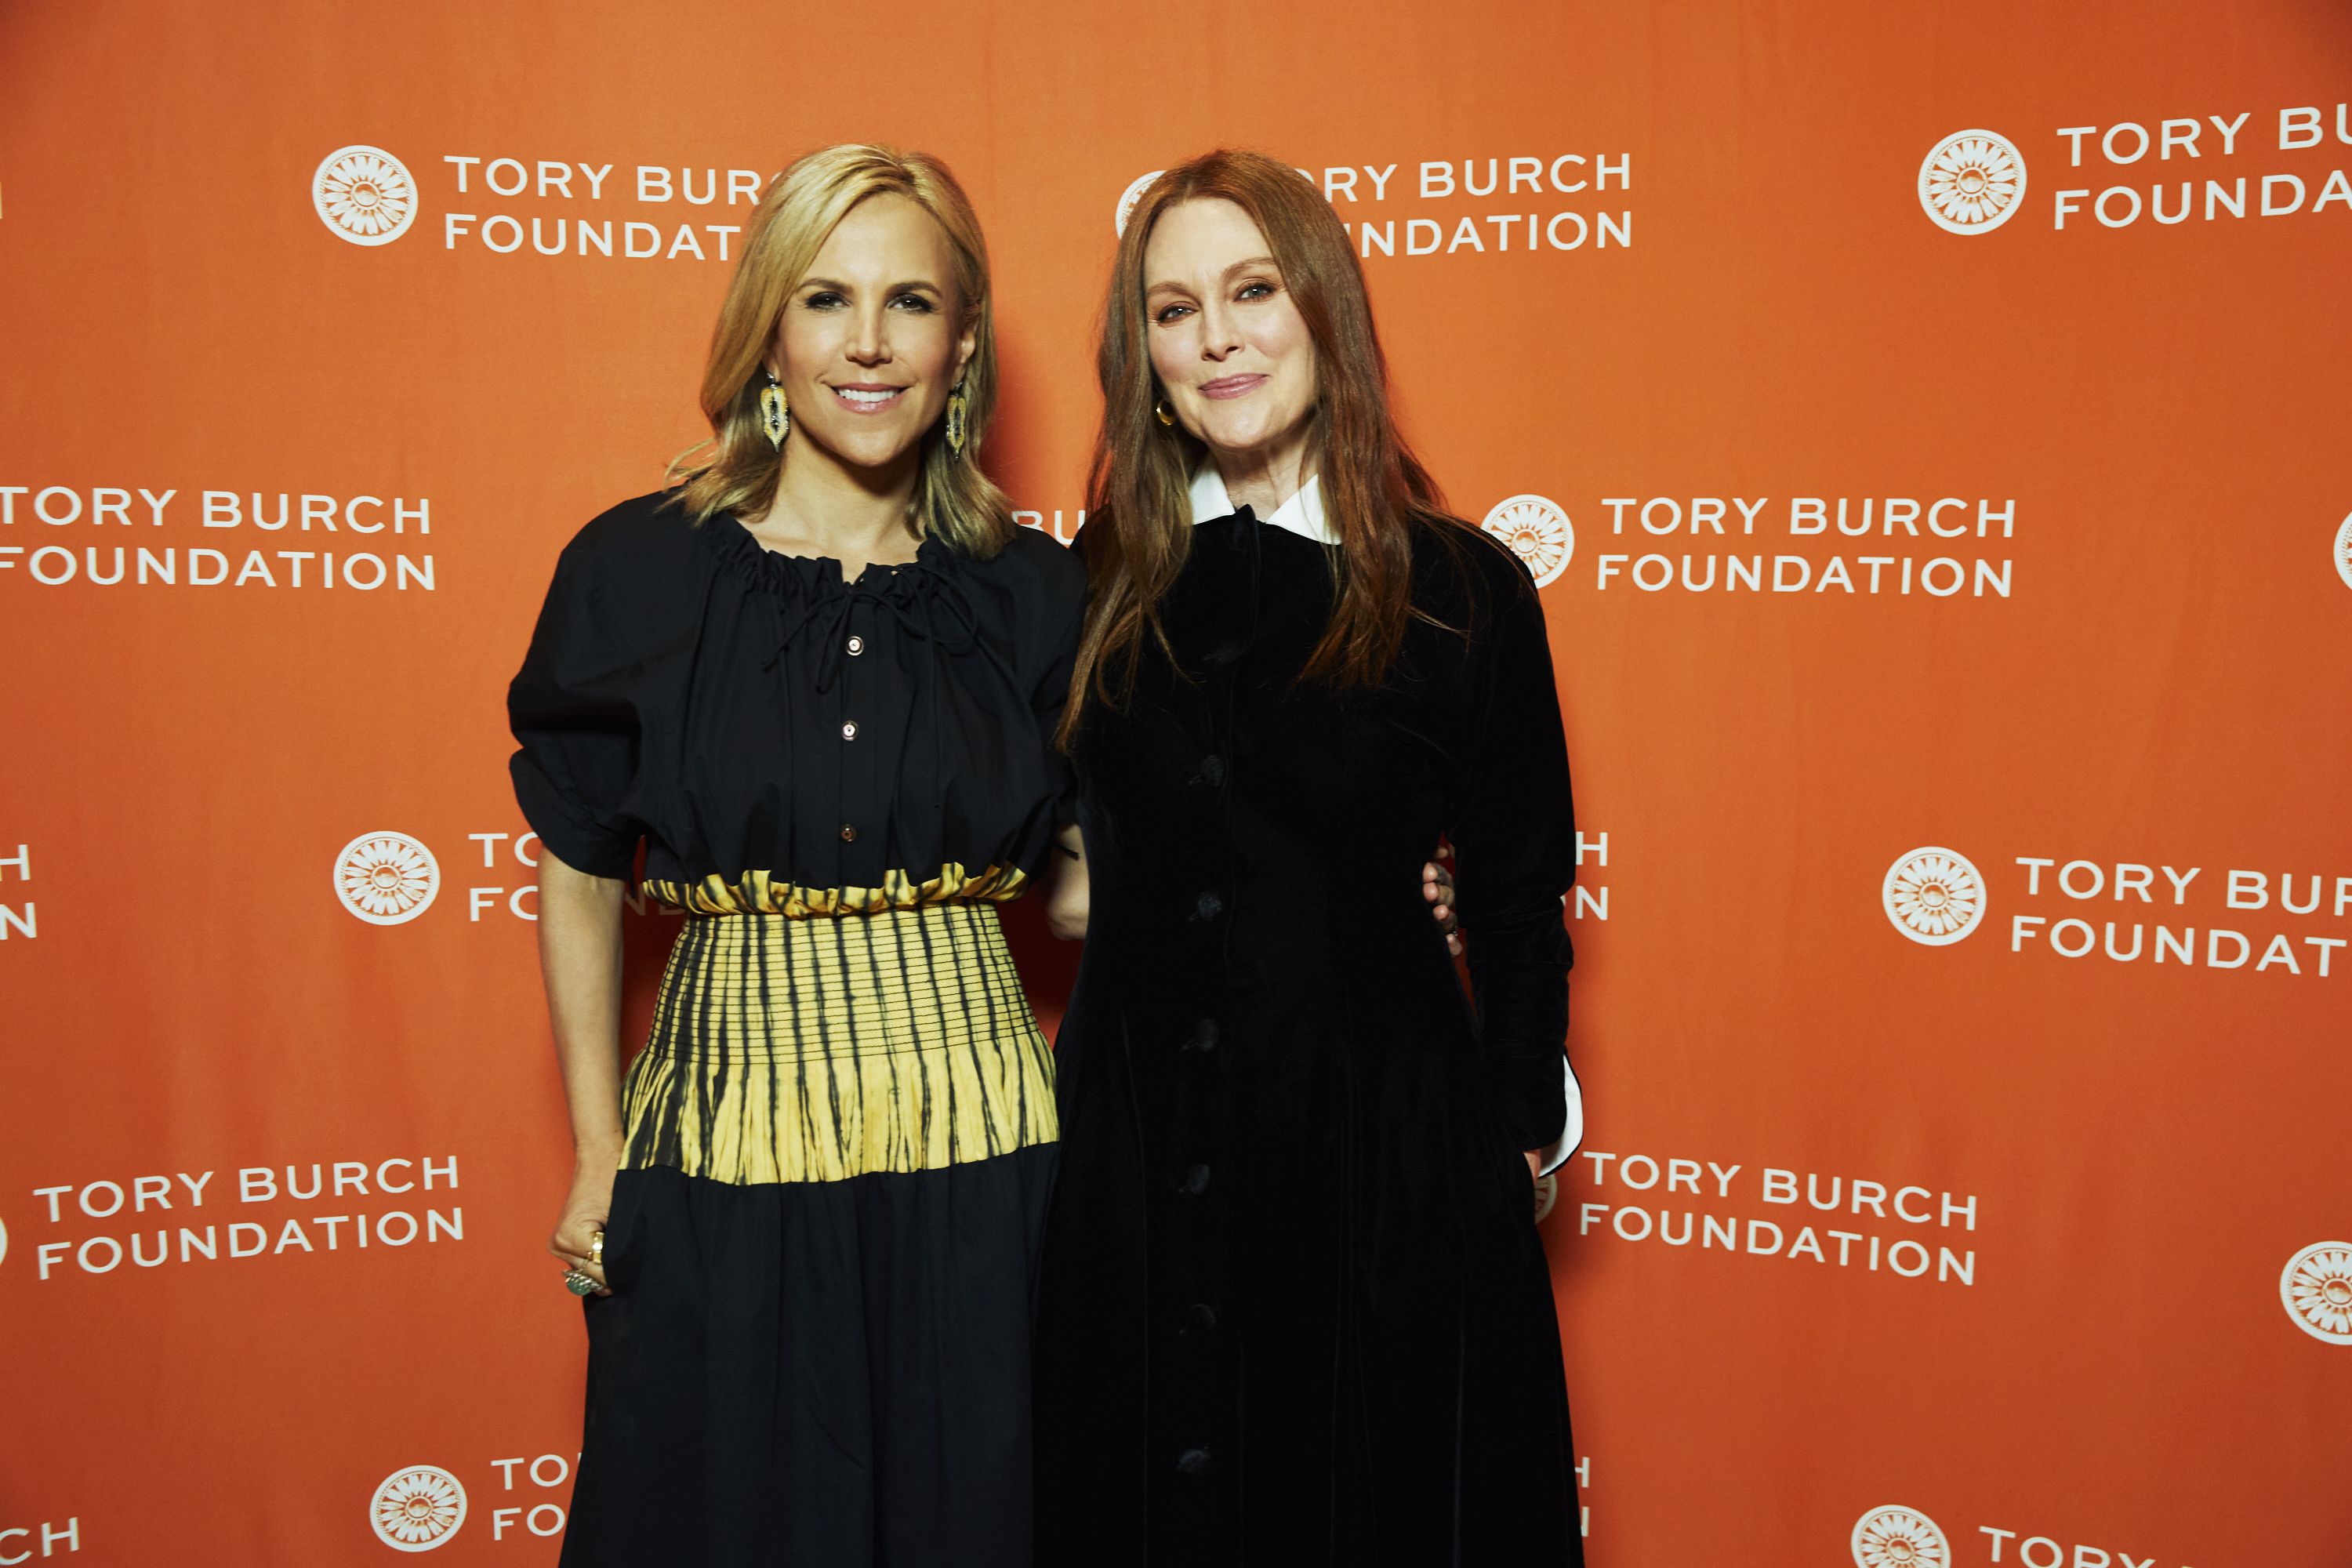 Tory Burch likes men her own age